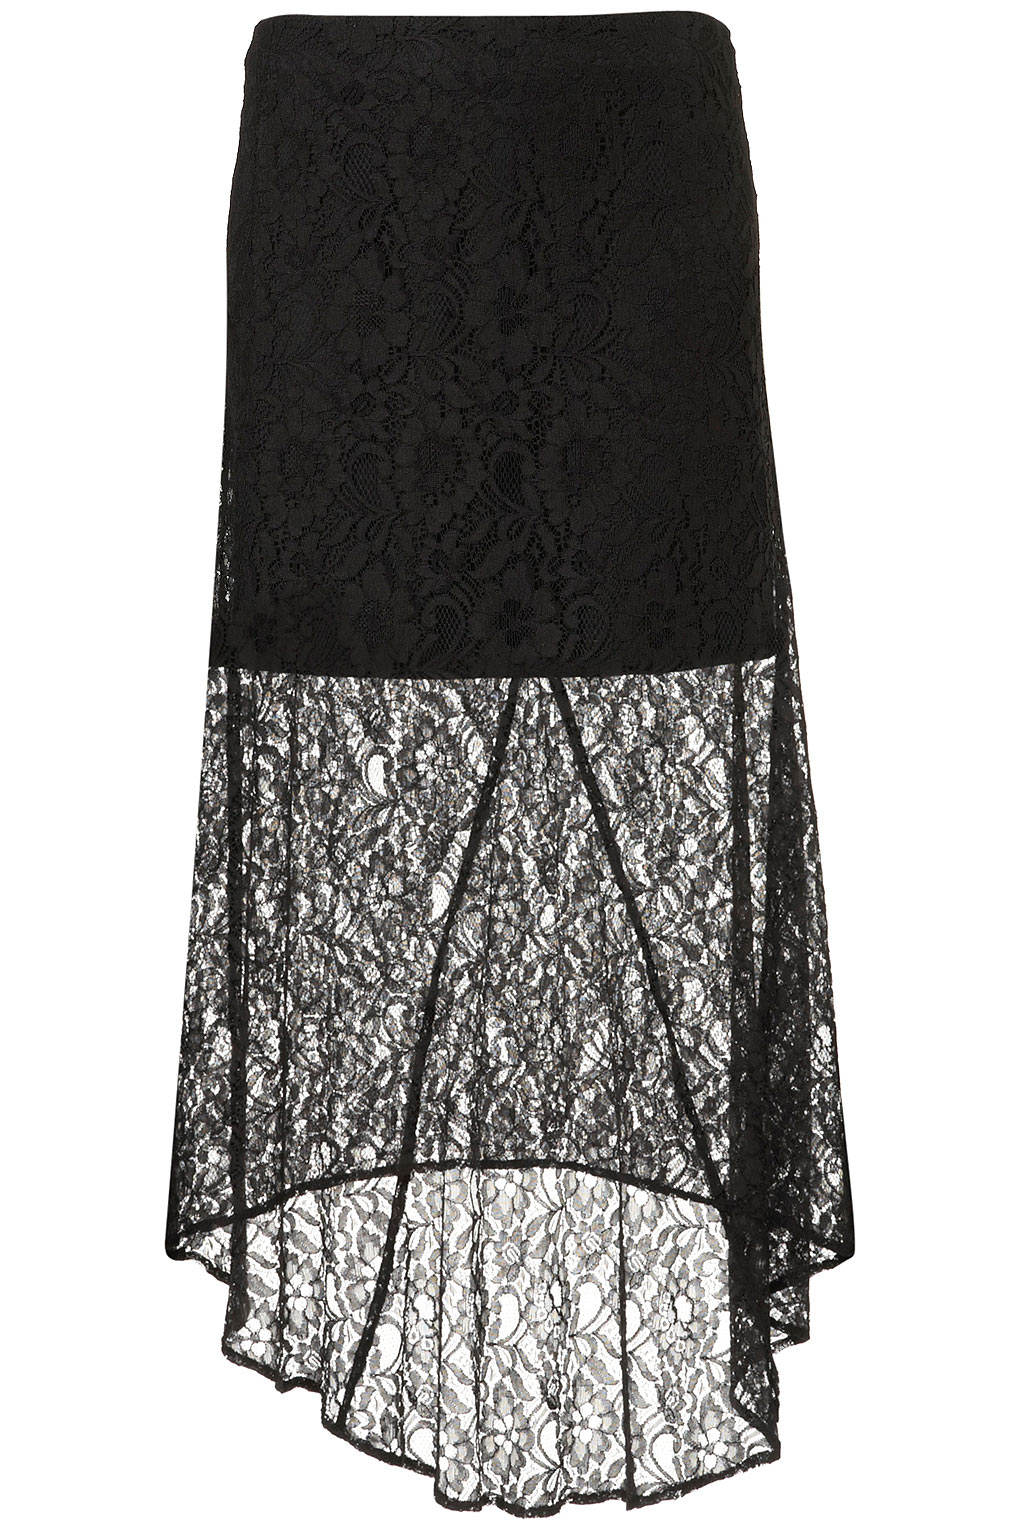 Lyst - Topshop Black Lace Maxi Skirt in Black